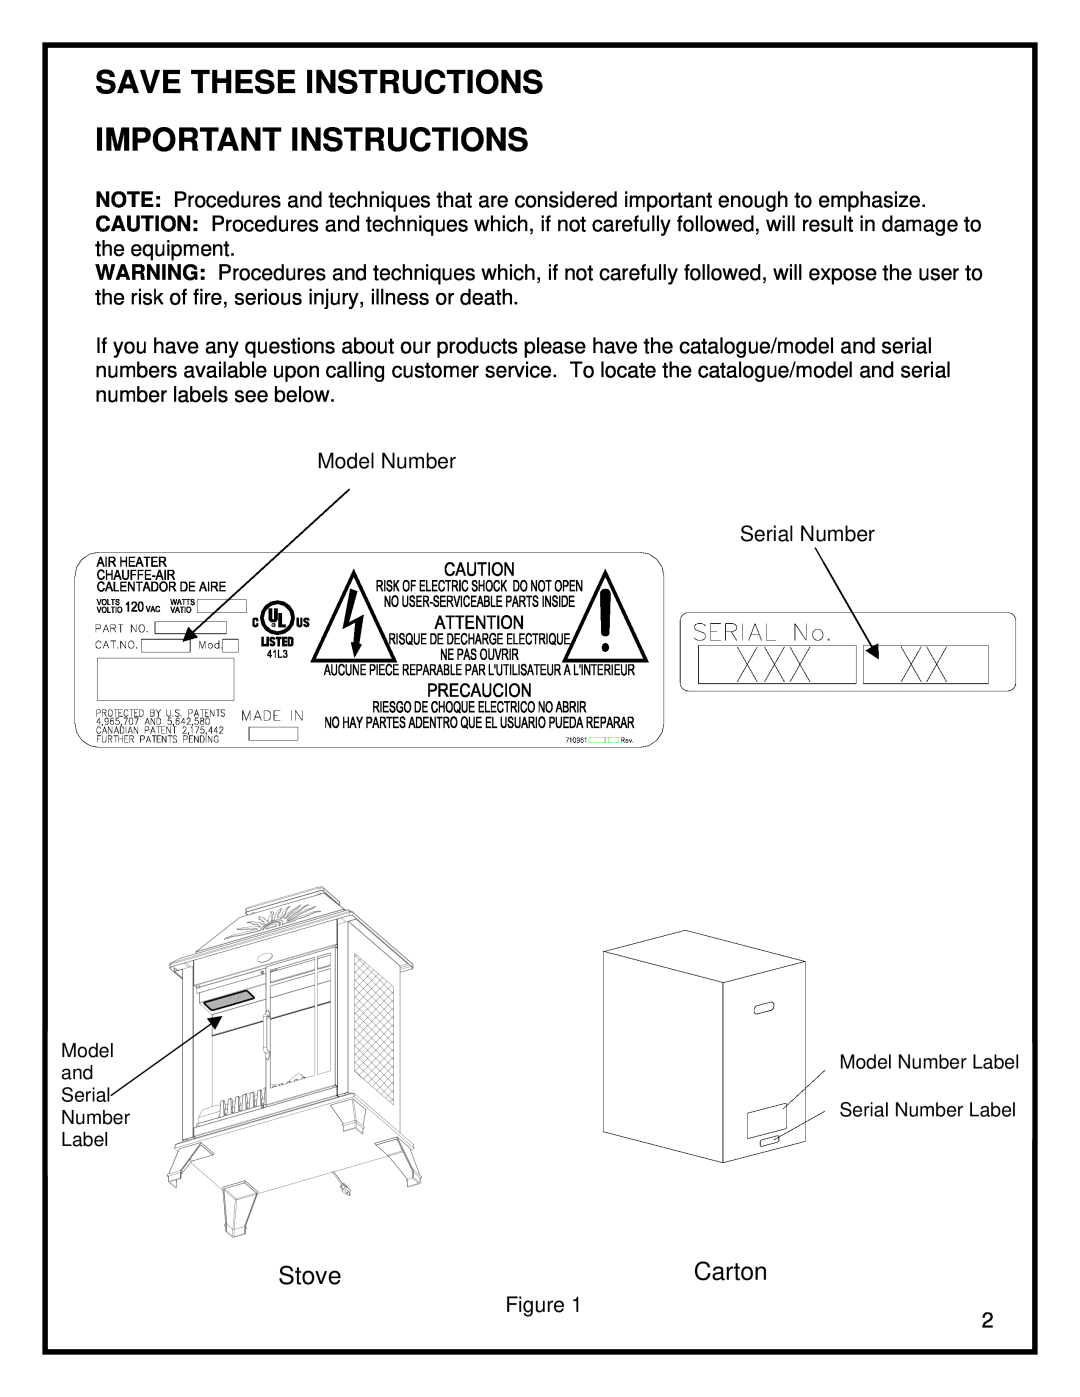 Dimplex ELECTRIC PATIO STOVE manual Save These Instructions Important Instructions, Stove, Carton 